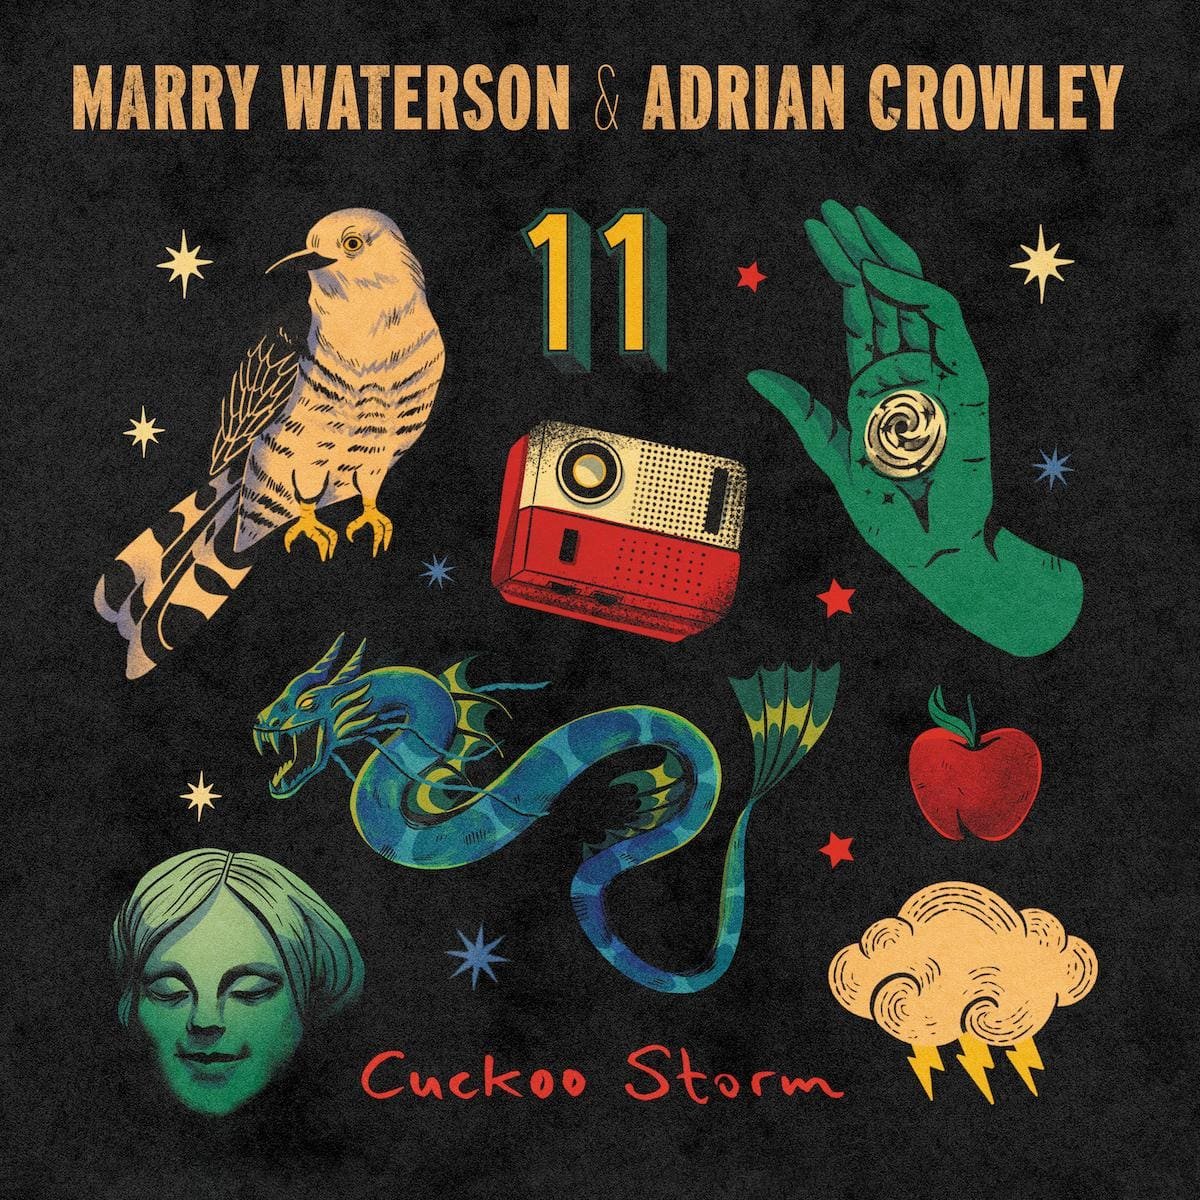 JUST IN! 'Cuckoo Storm' by Marry Waterson & Adrian Crowley The English folk songwriter joins the Irish vocalist for eleven original tracks. @MarryWaterson @MrAdrianCrowley @olirecords normanrecords.com/records/200777…